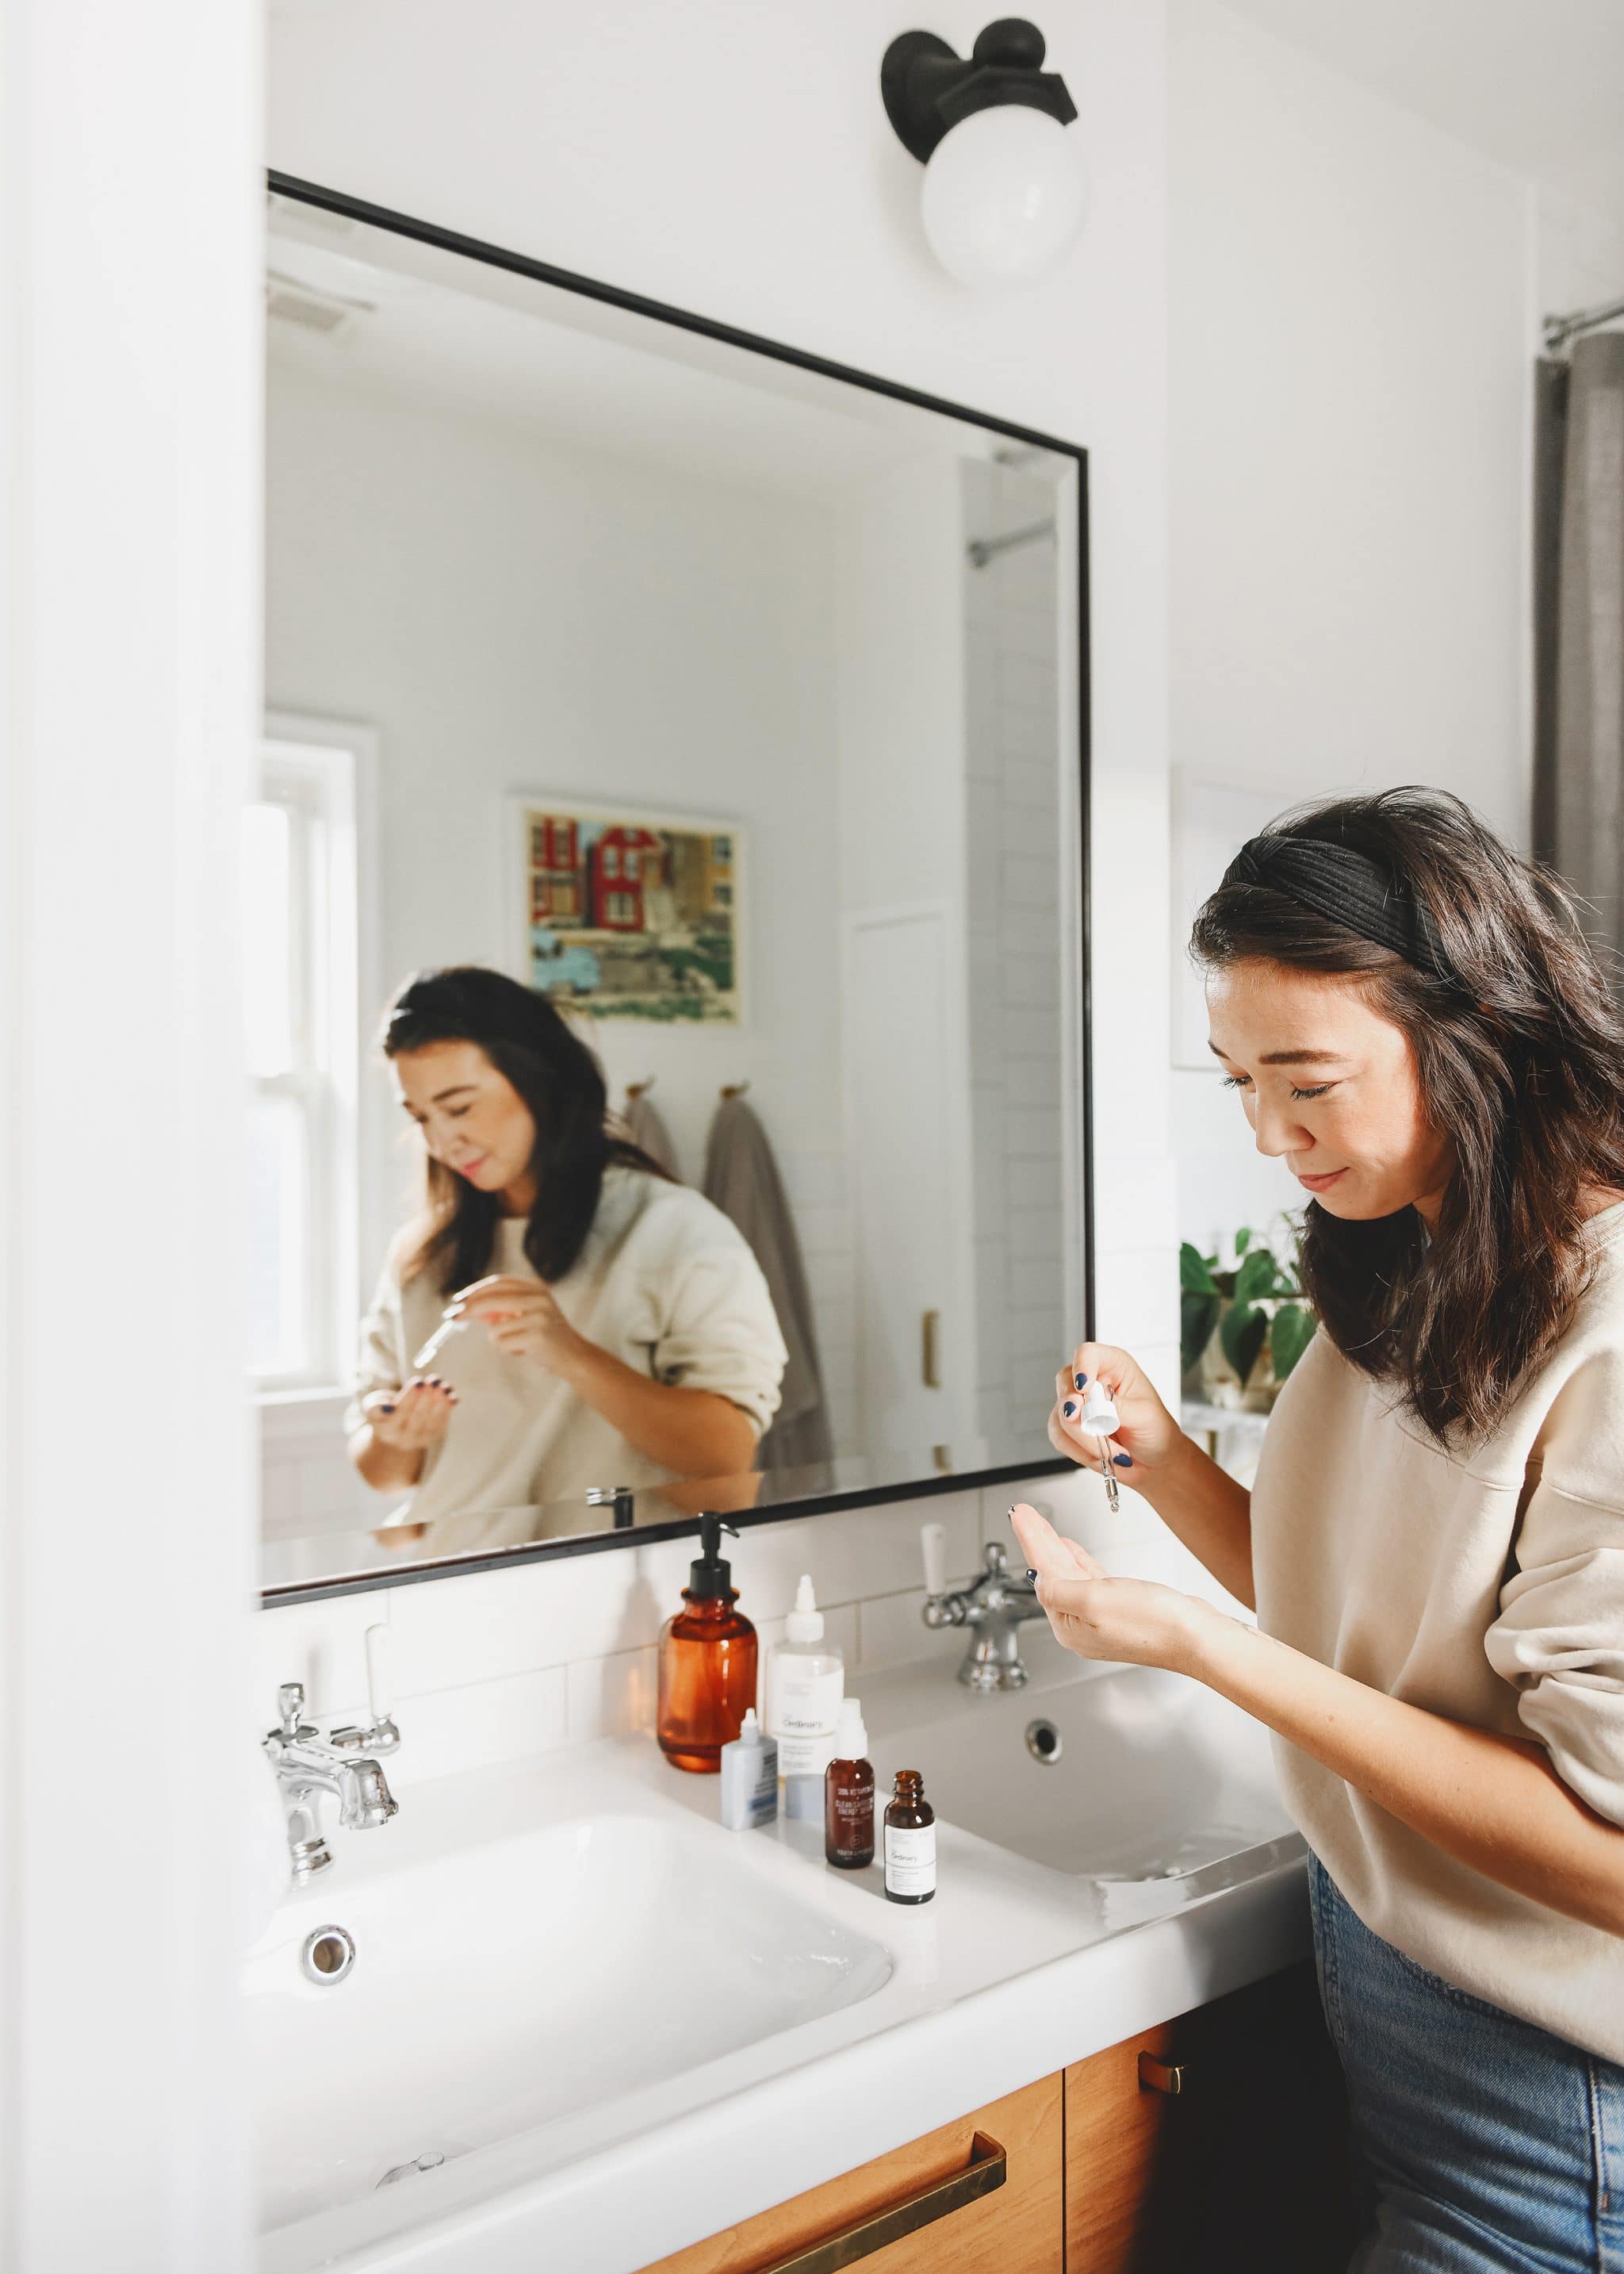 Kim adding squalane to vitamin C as a part of the morning skincare routine | My Skincare Routine + Essential Products via Yellow Brick Home